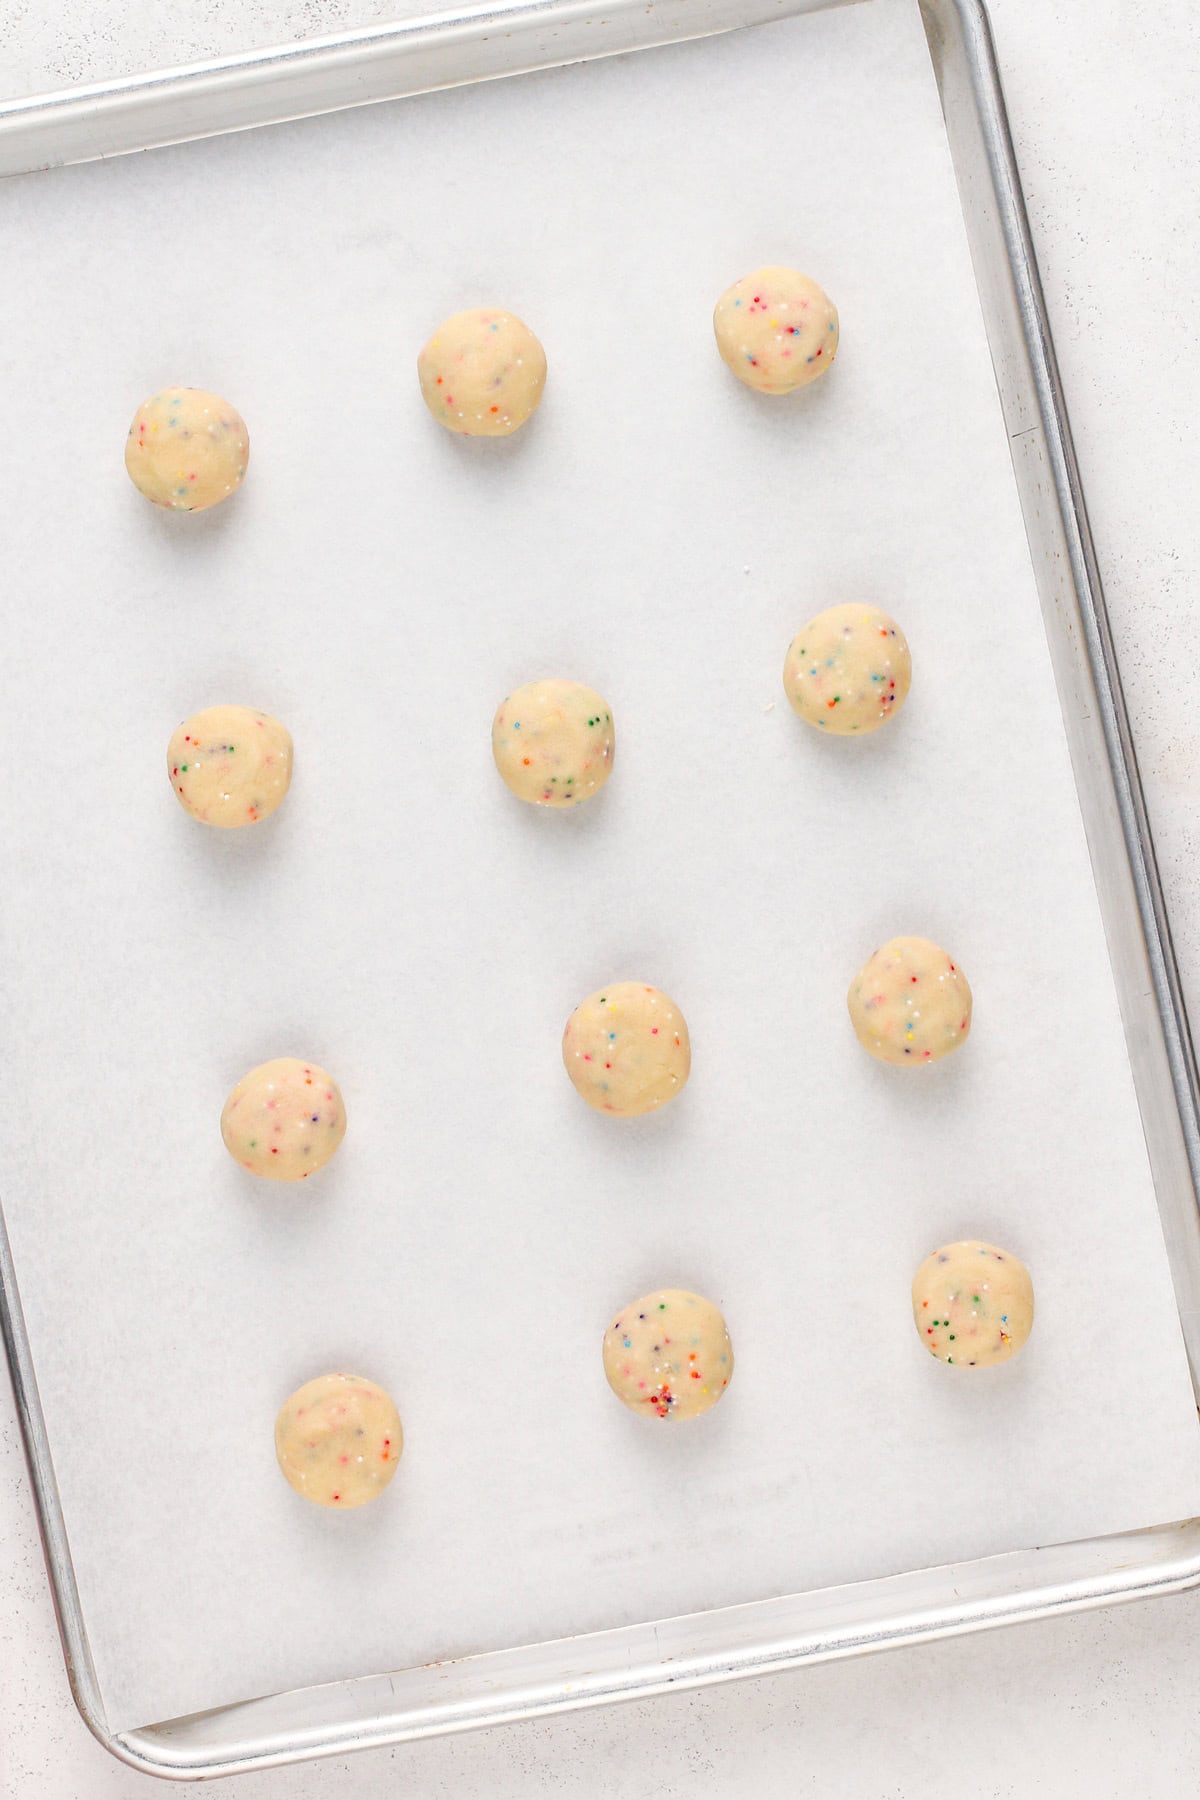 Balls of easy sugar cookie dough with nonpareil sprinkles arranged on a parchment-lined baking sheet.